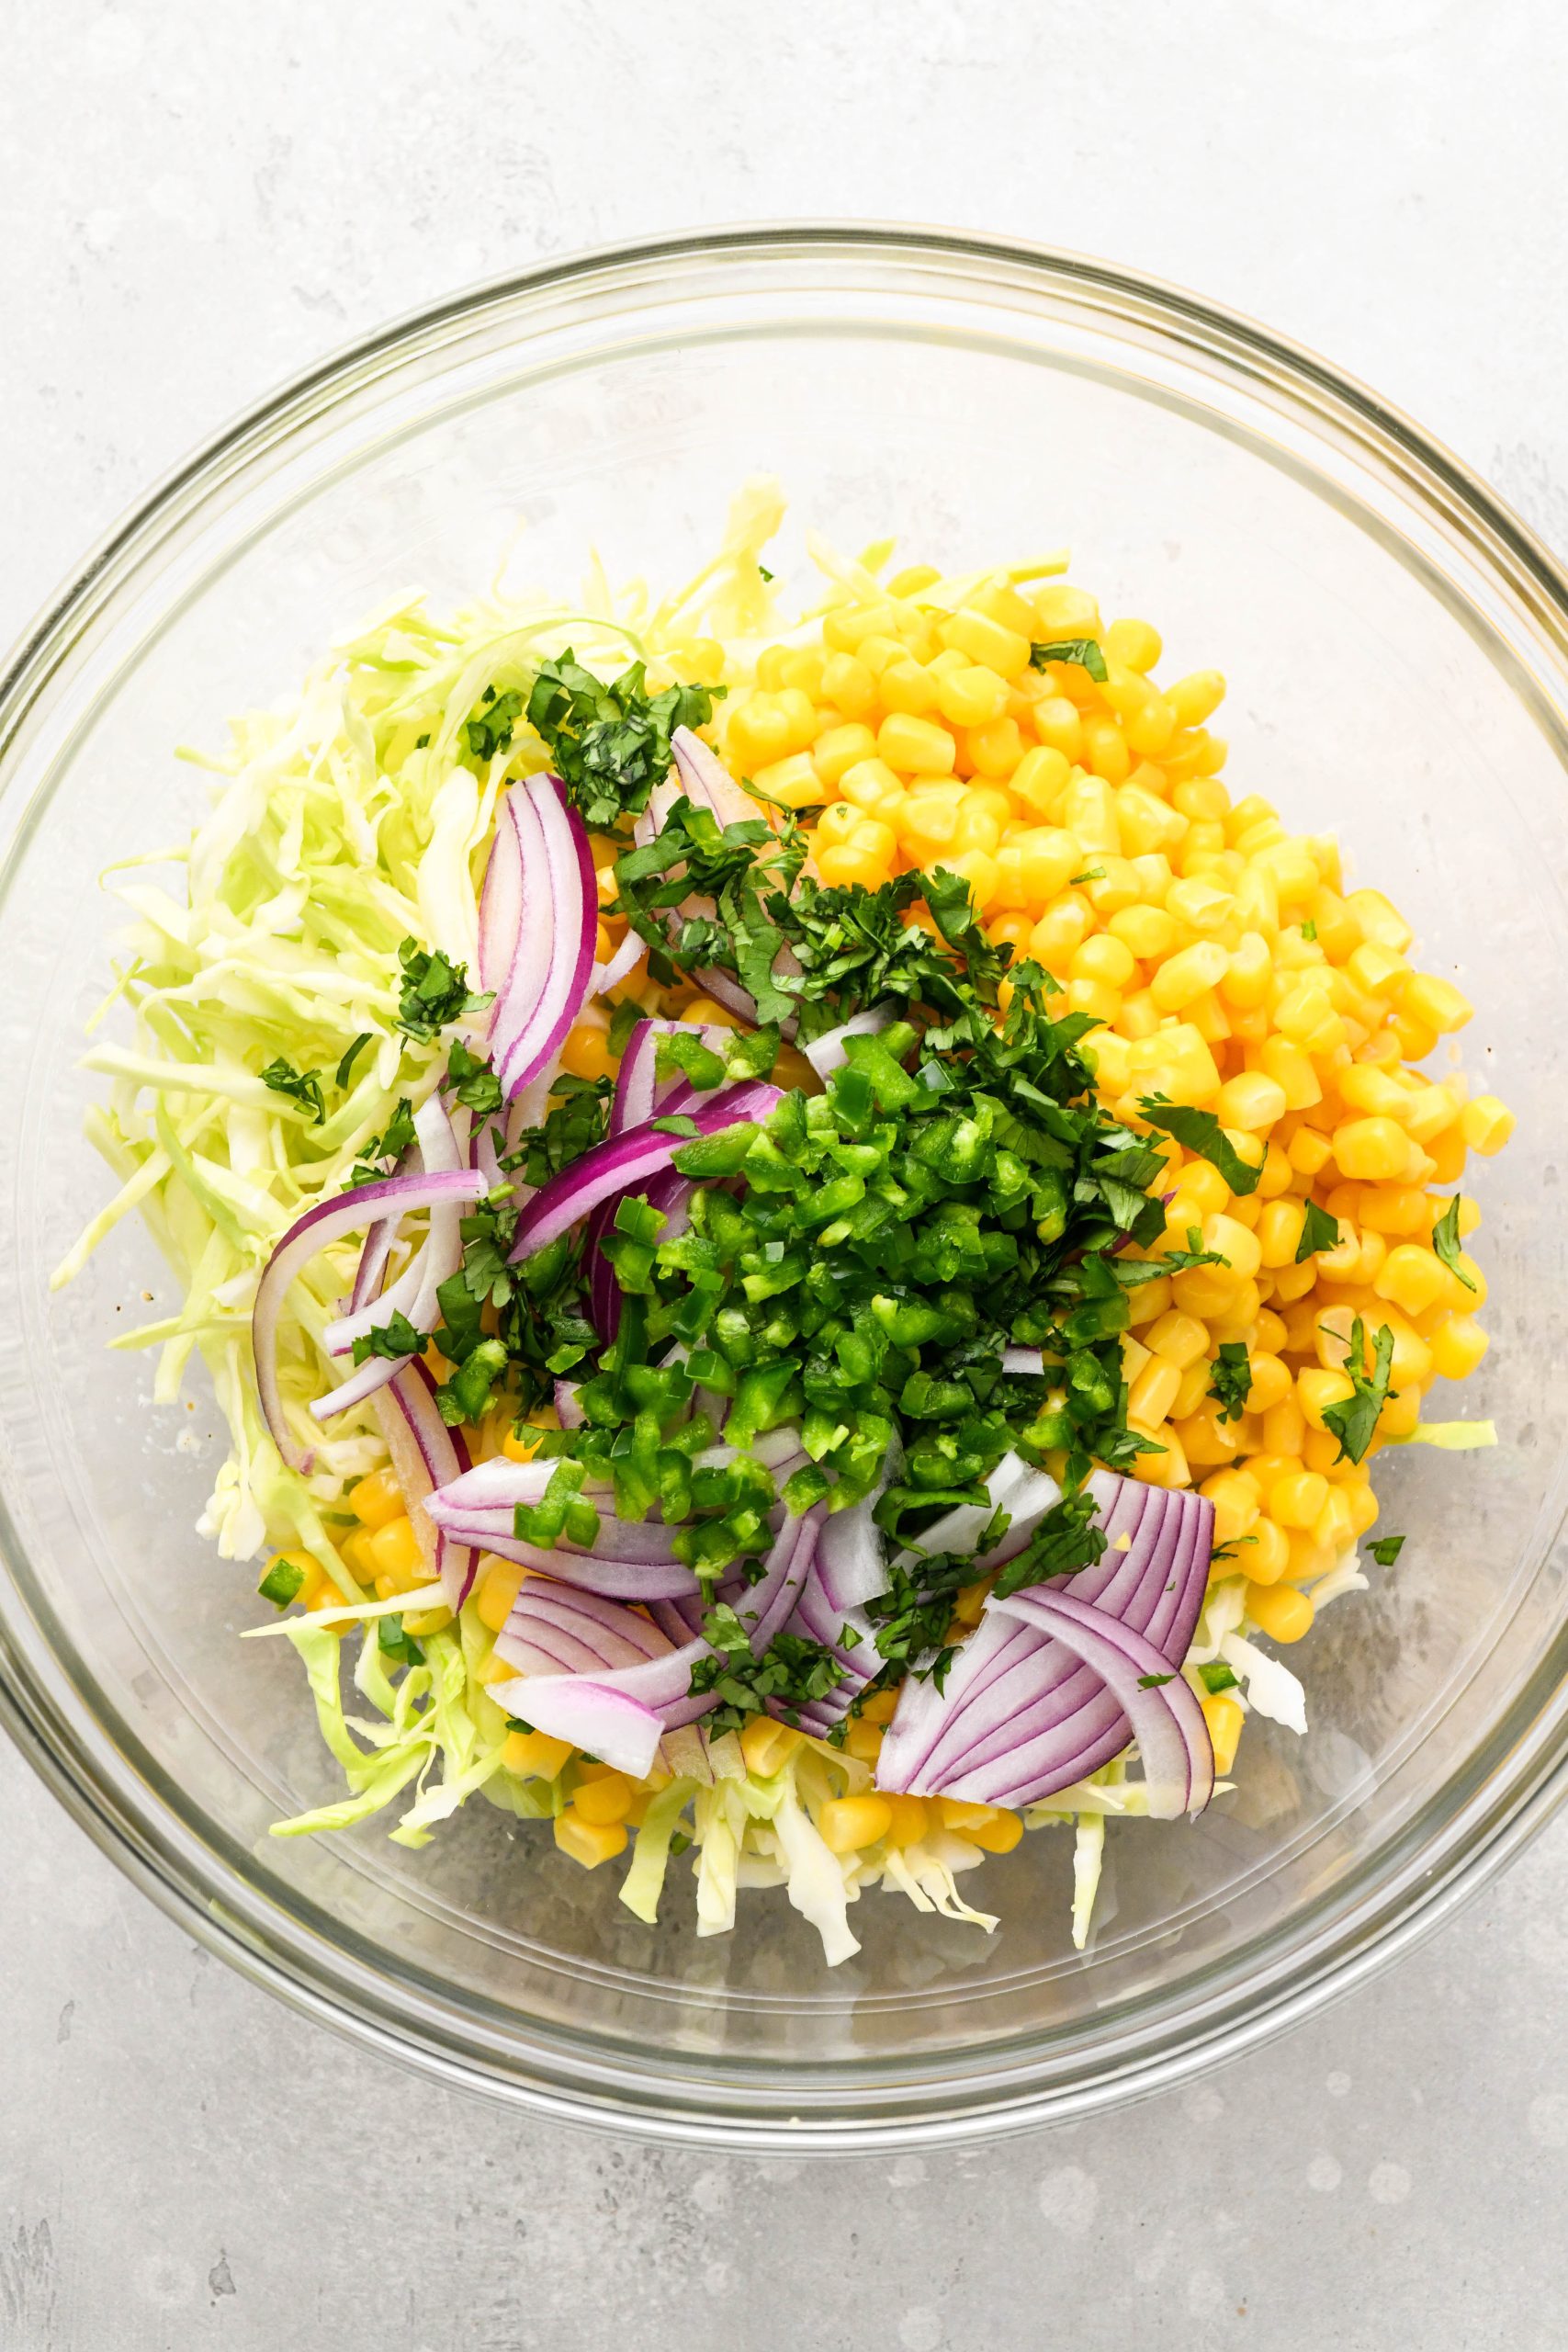 How to make ground pork tacos with creamy slaw: Fresh ingredients added to the large glass bowl with the creamy dressing before mixing.